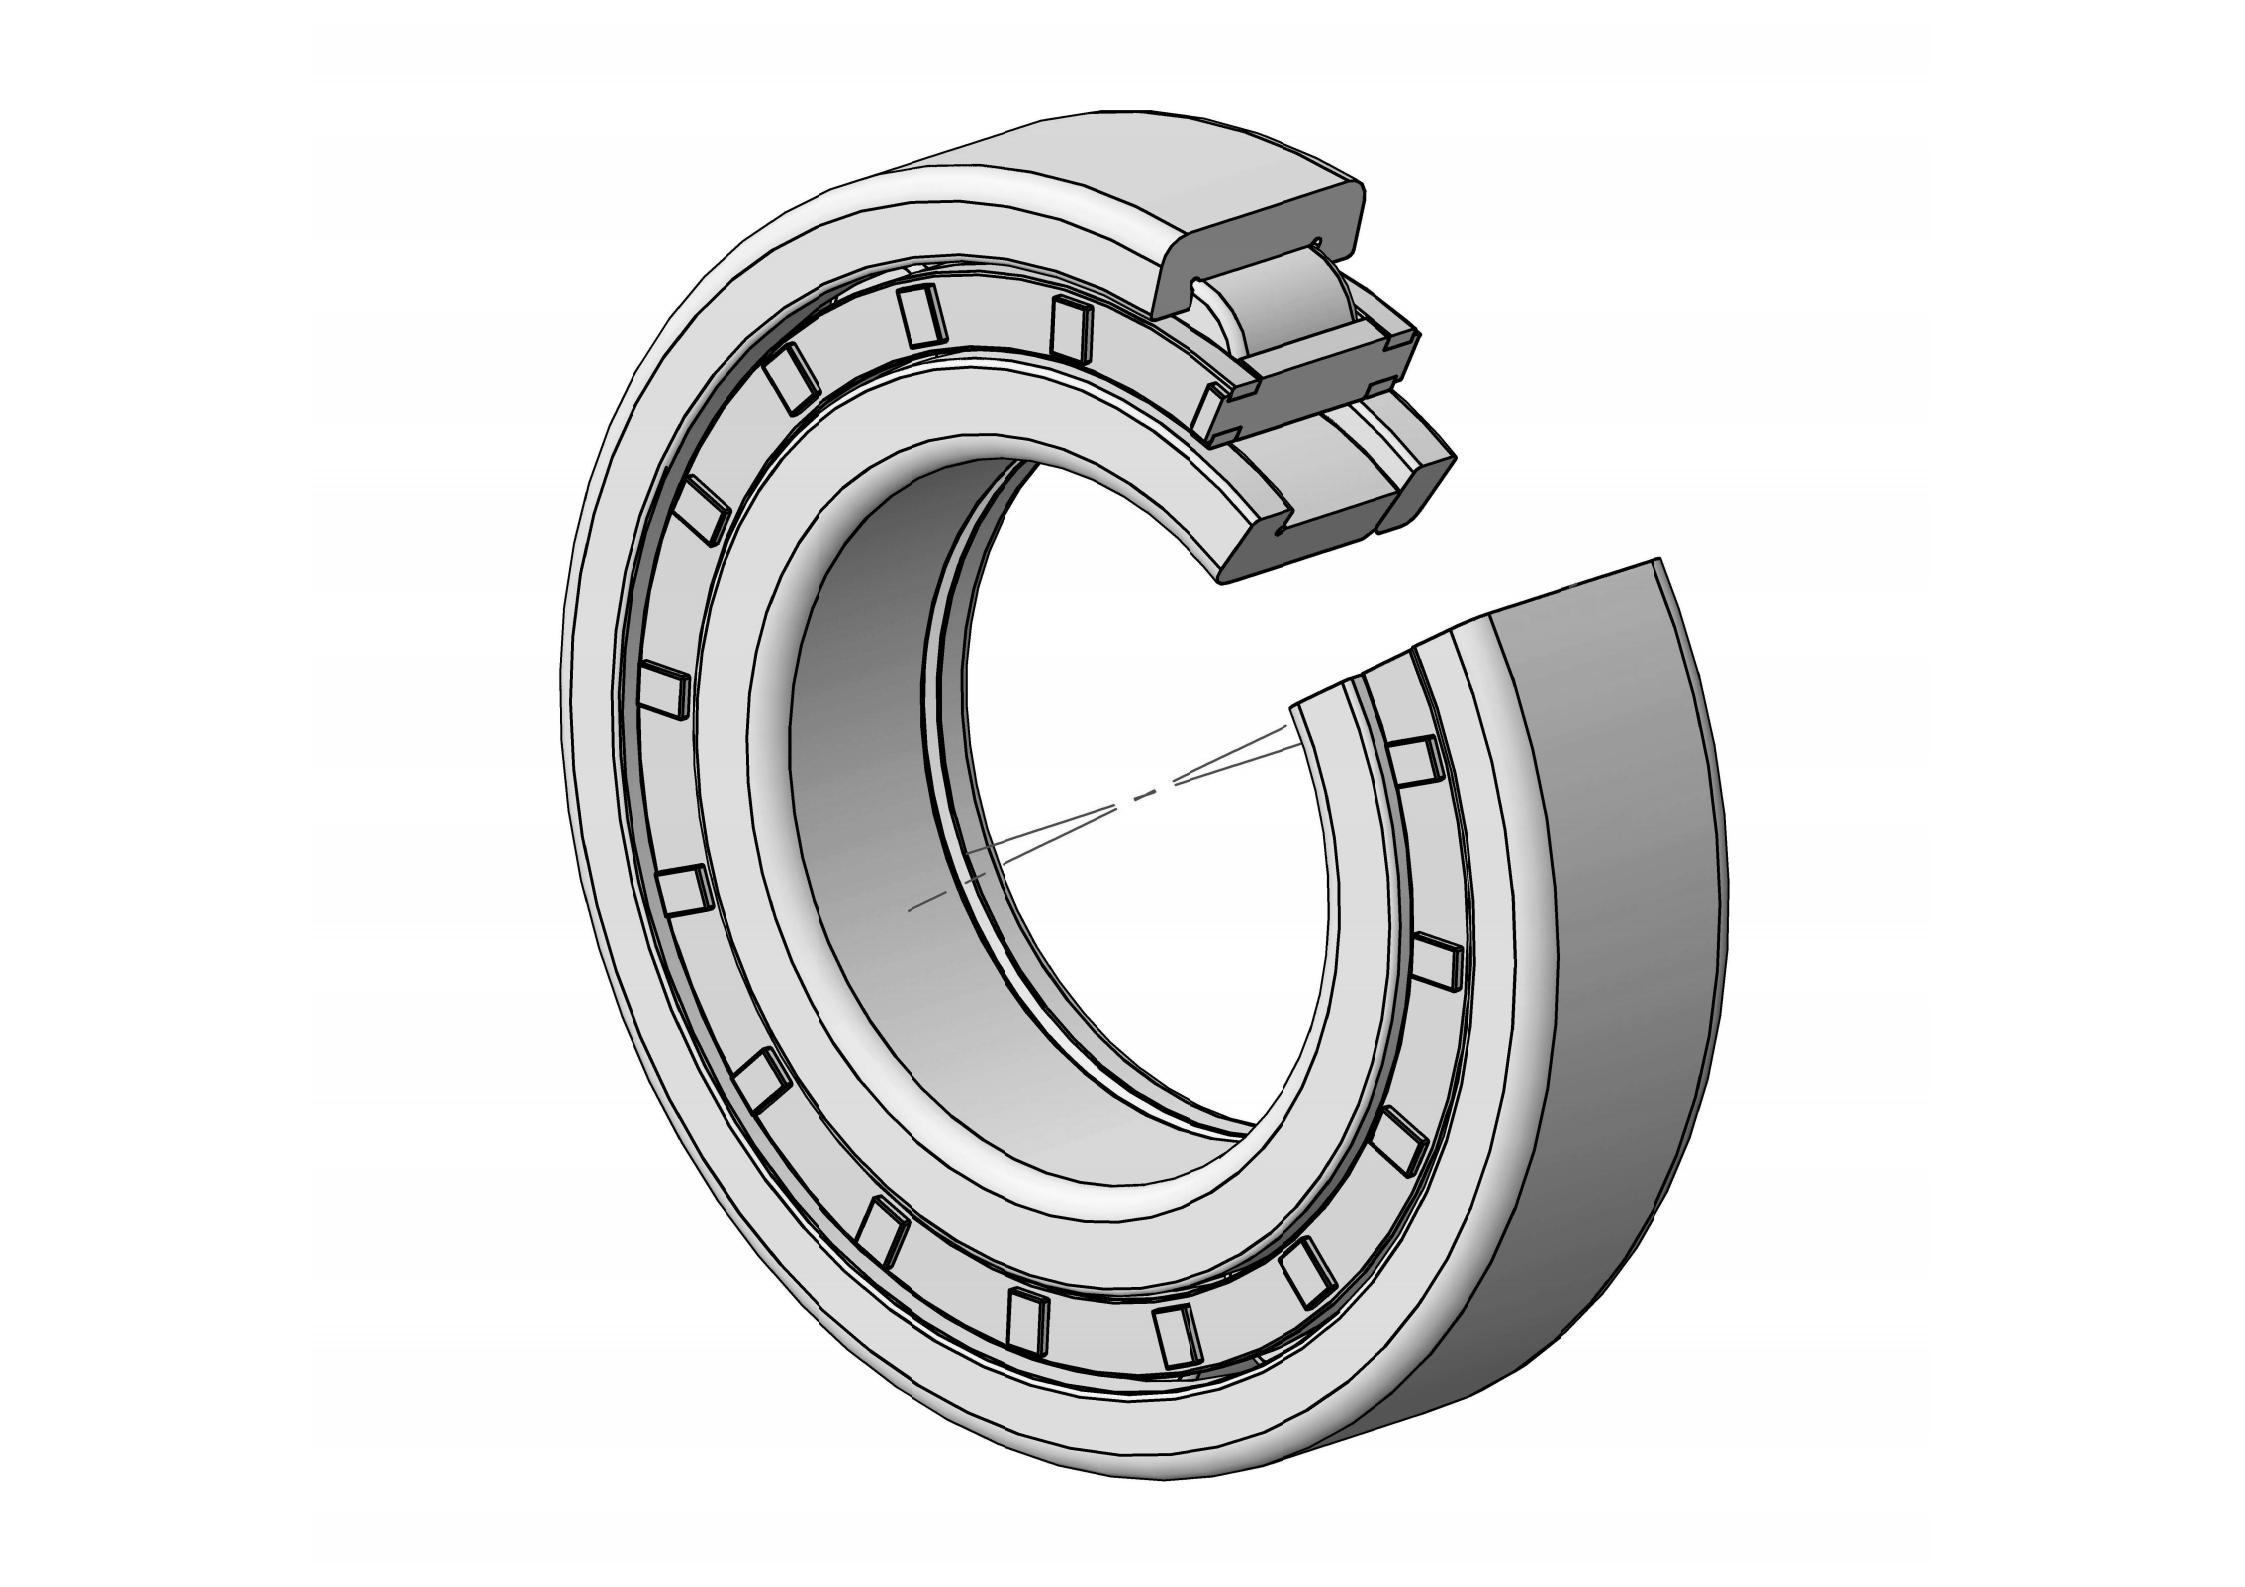 NUP234-EM Single Row Cylindrical roller bearing 